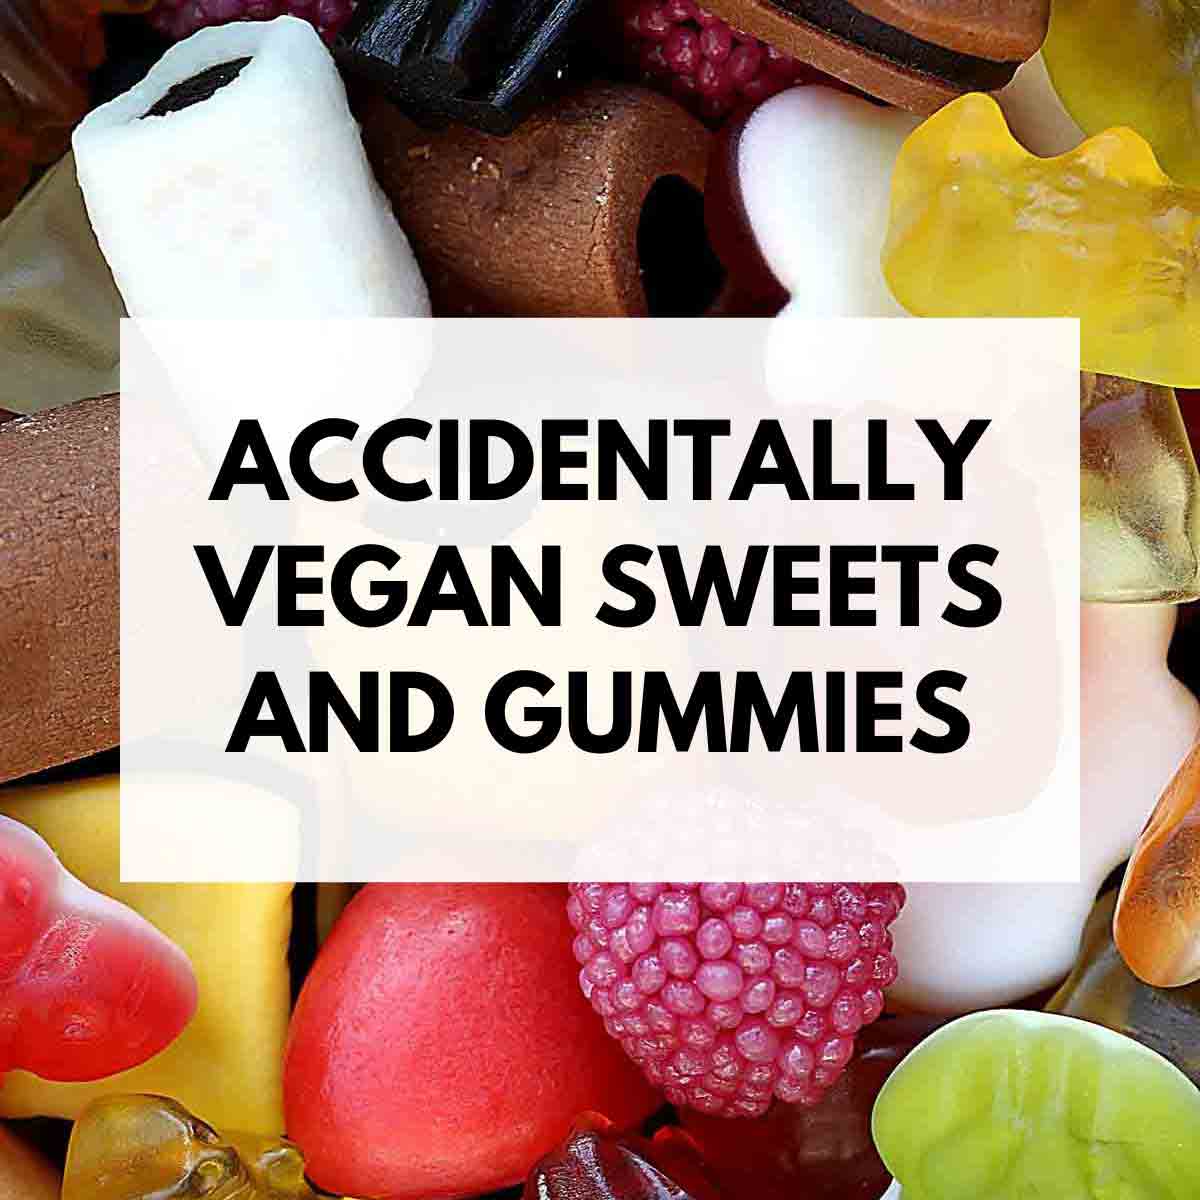 Image Of Mixed Candy With Text Overlay That Reads: Accidentally vegan Sweets And Gummies.